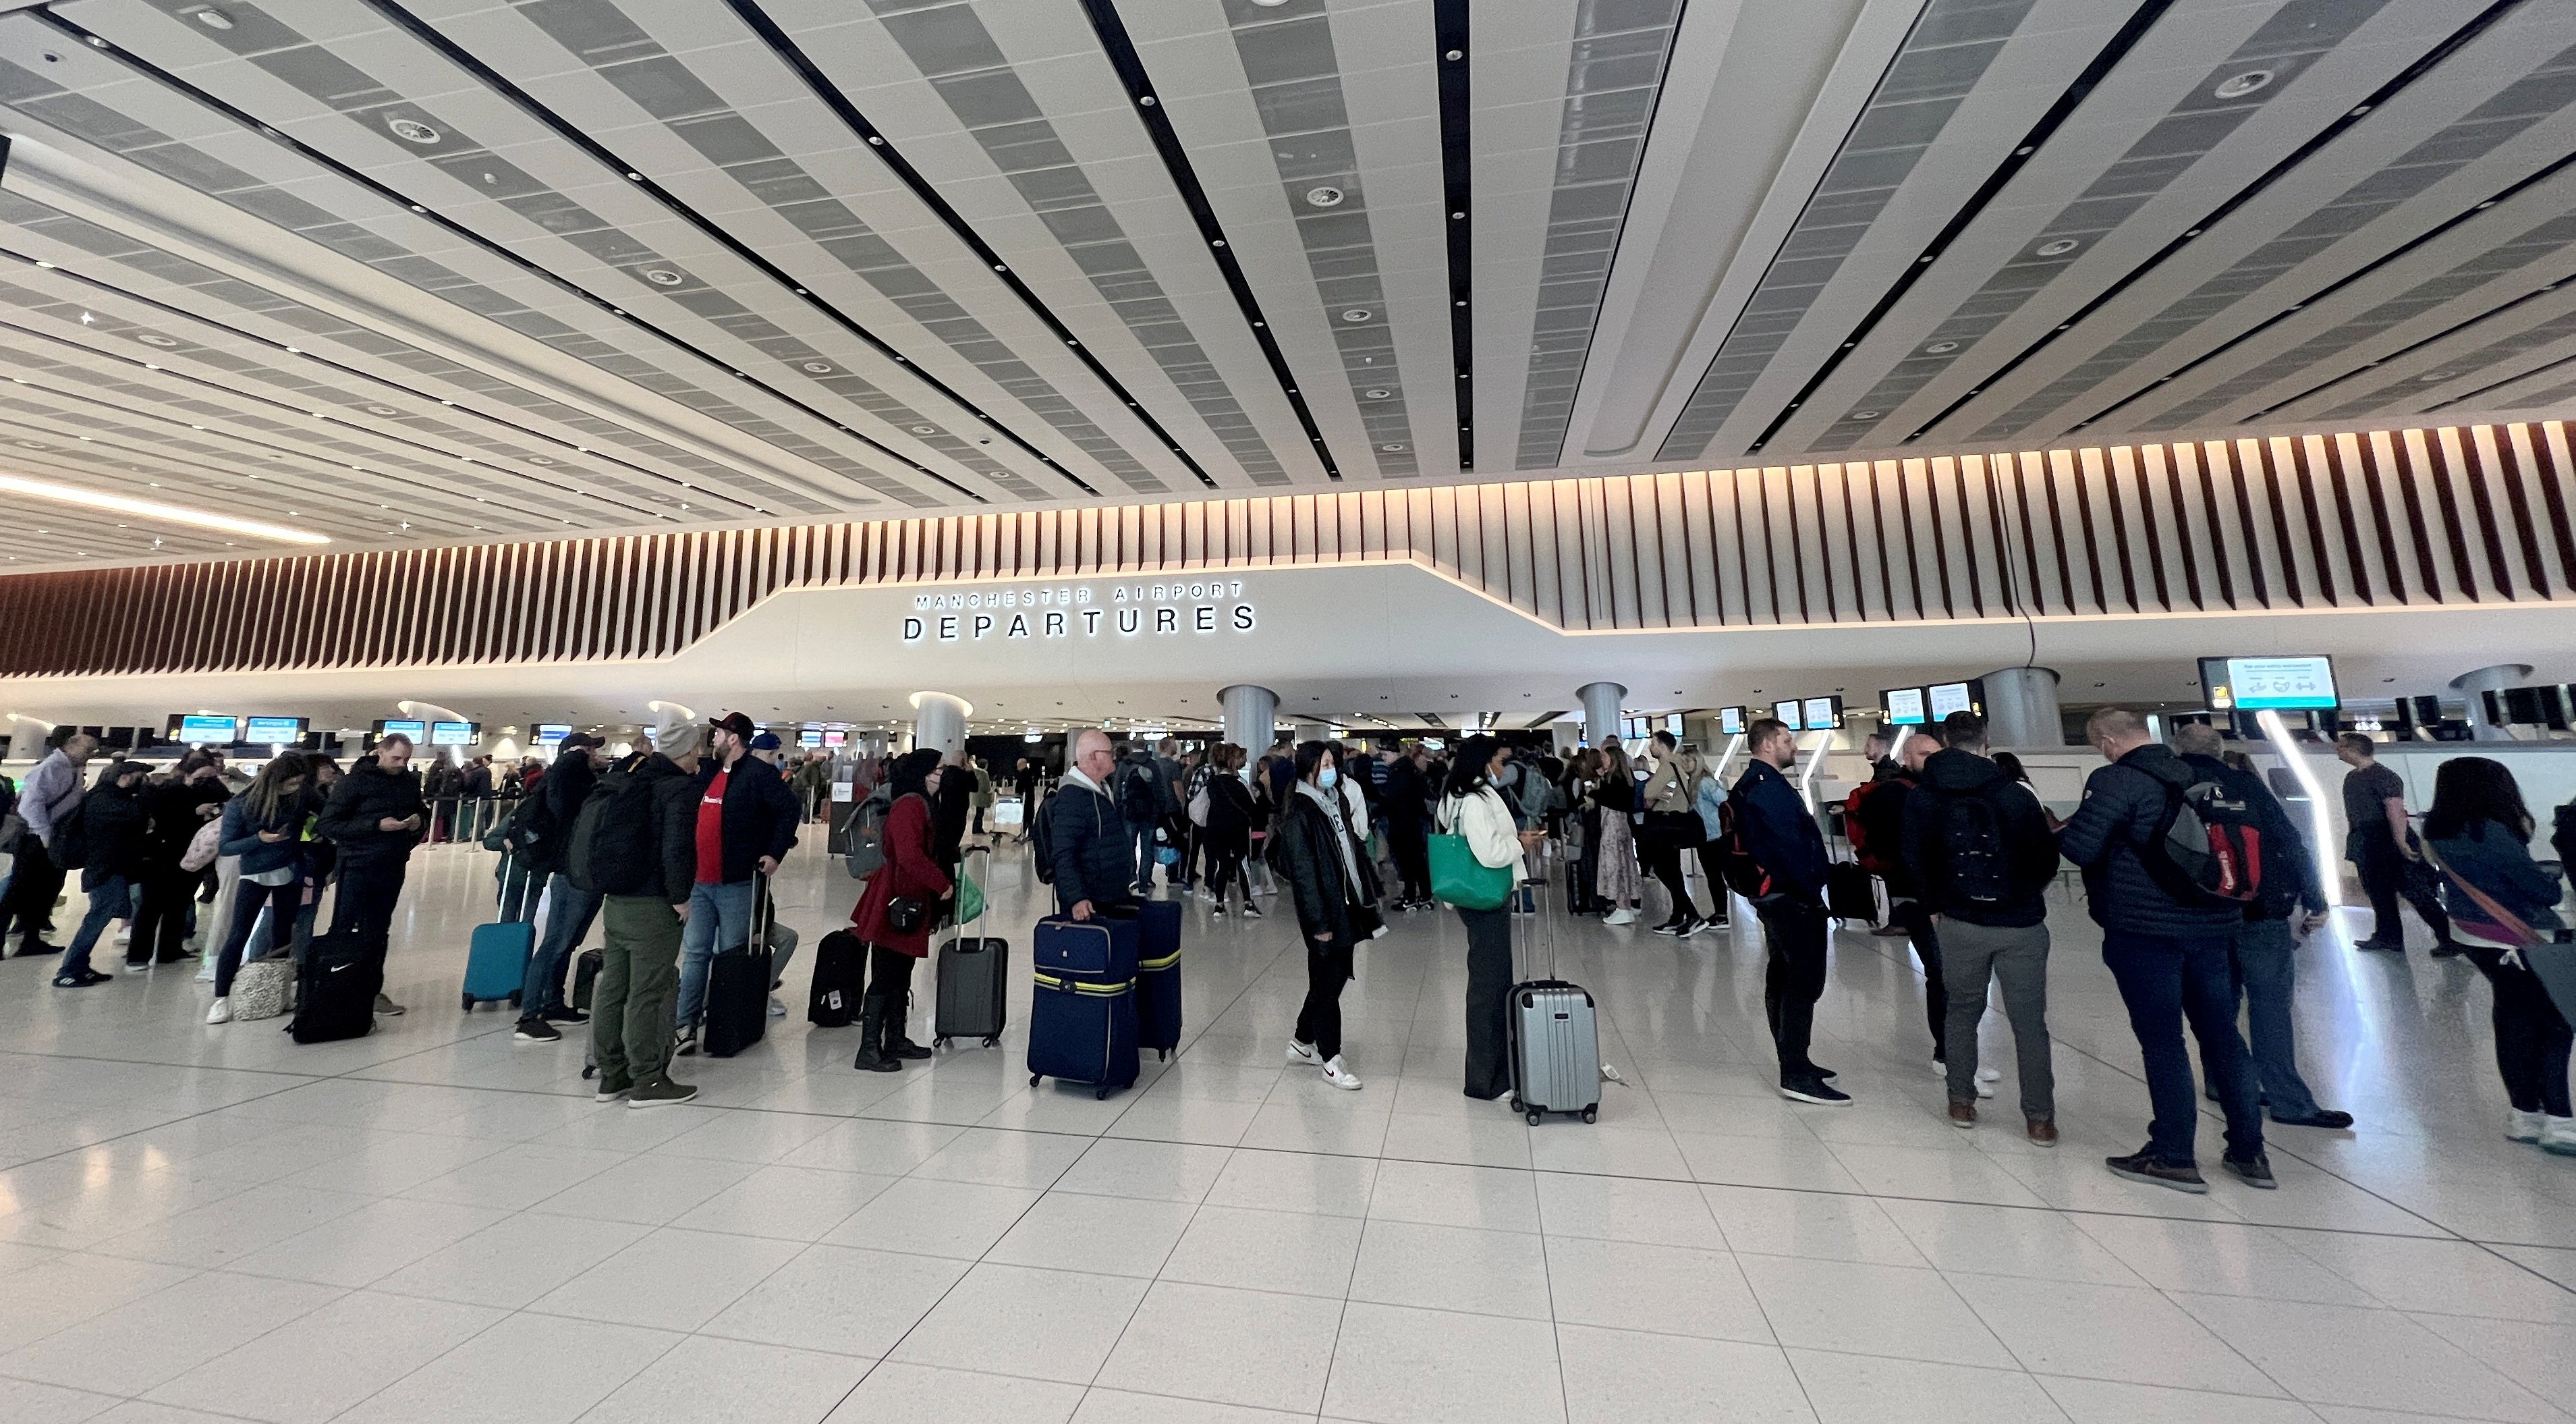 Passengers queue for security screening in the departures area of Terminal 2 at Manchester Airport